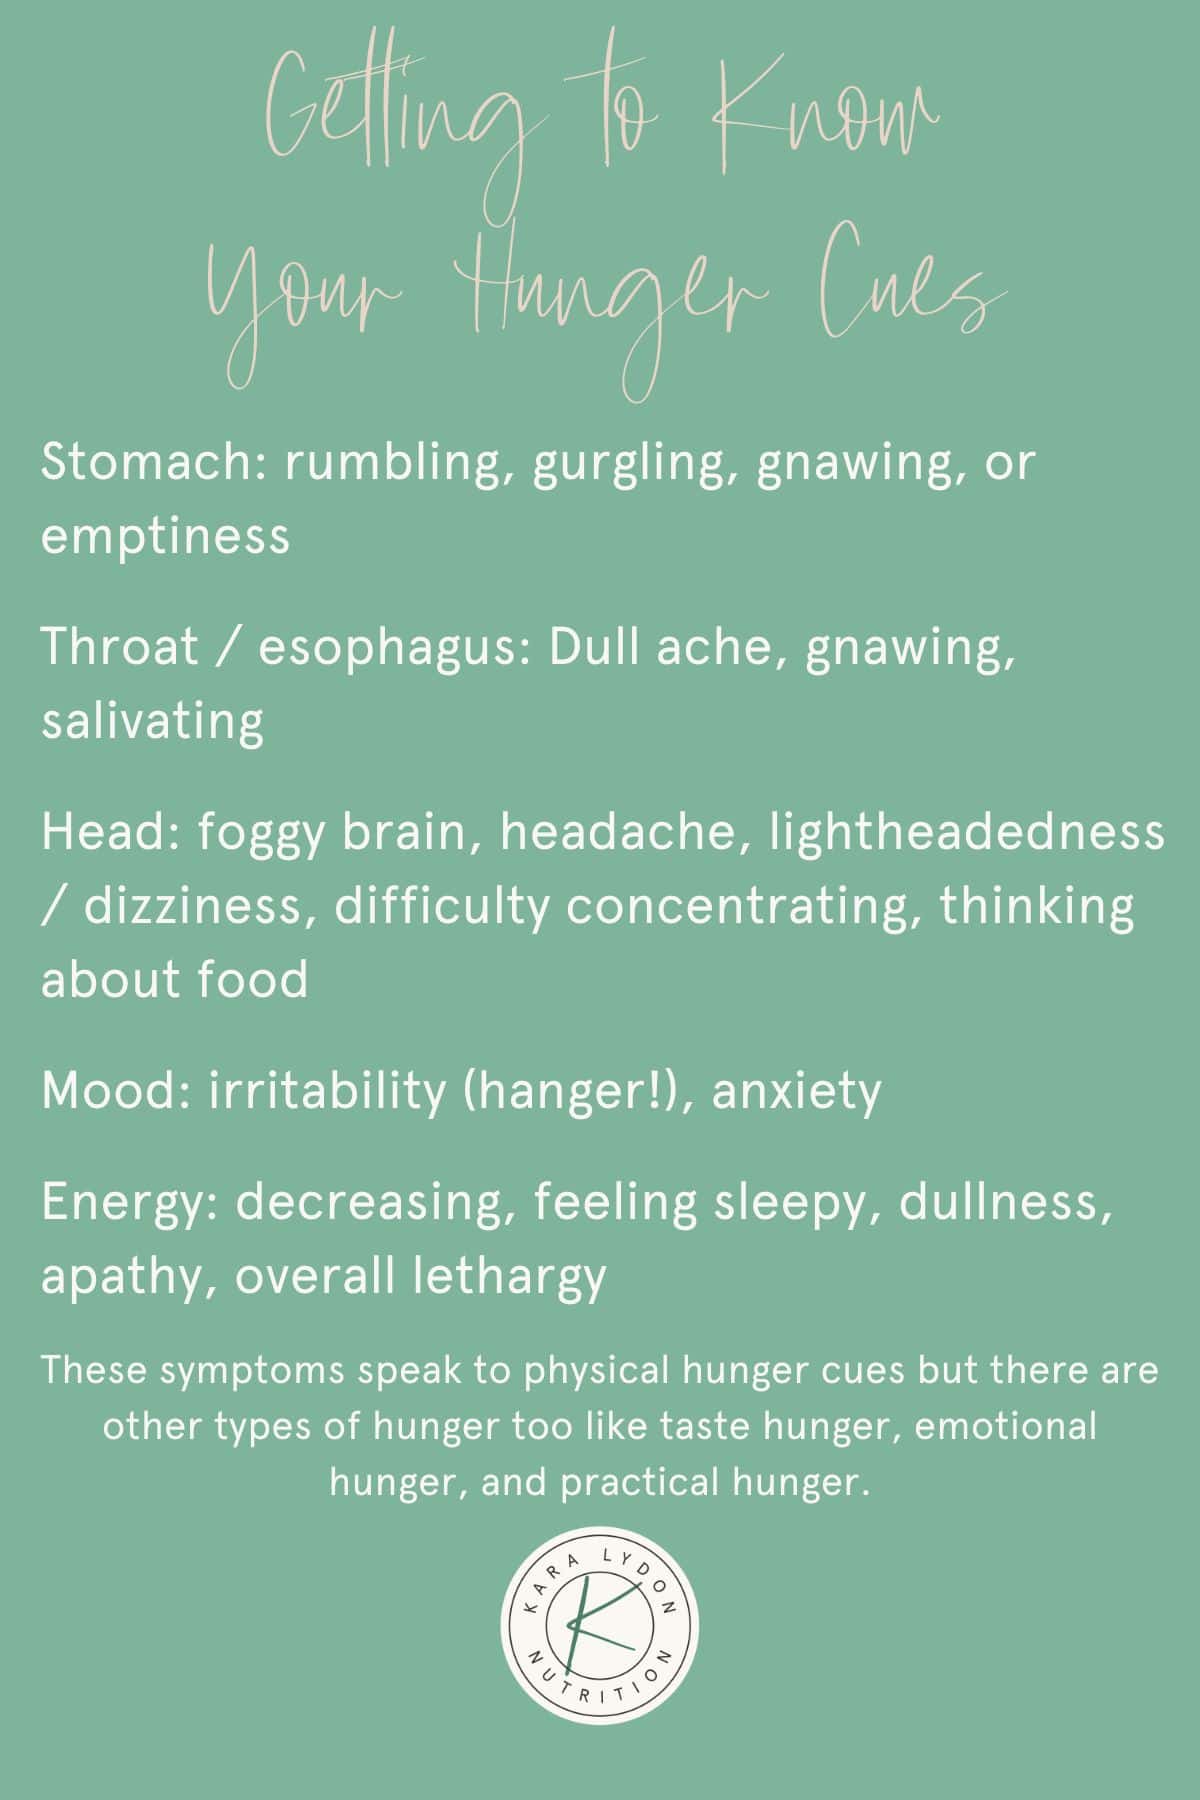 Graphic listing ways of getting to know your hunger cues with physical symptoms